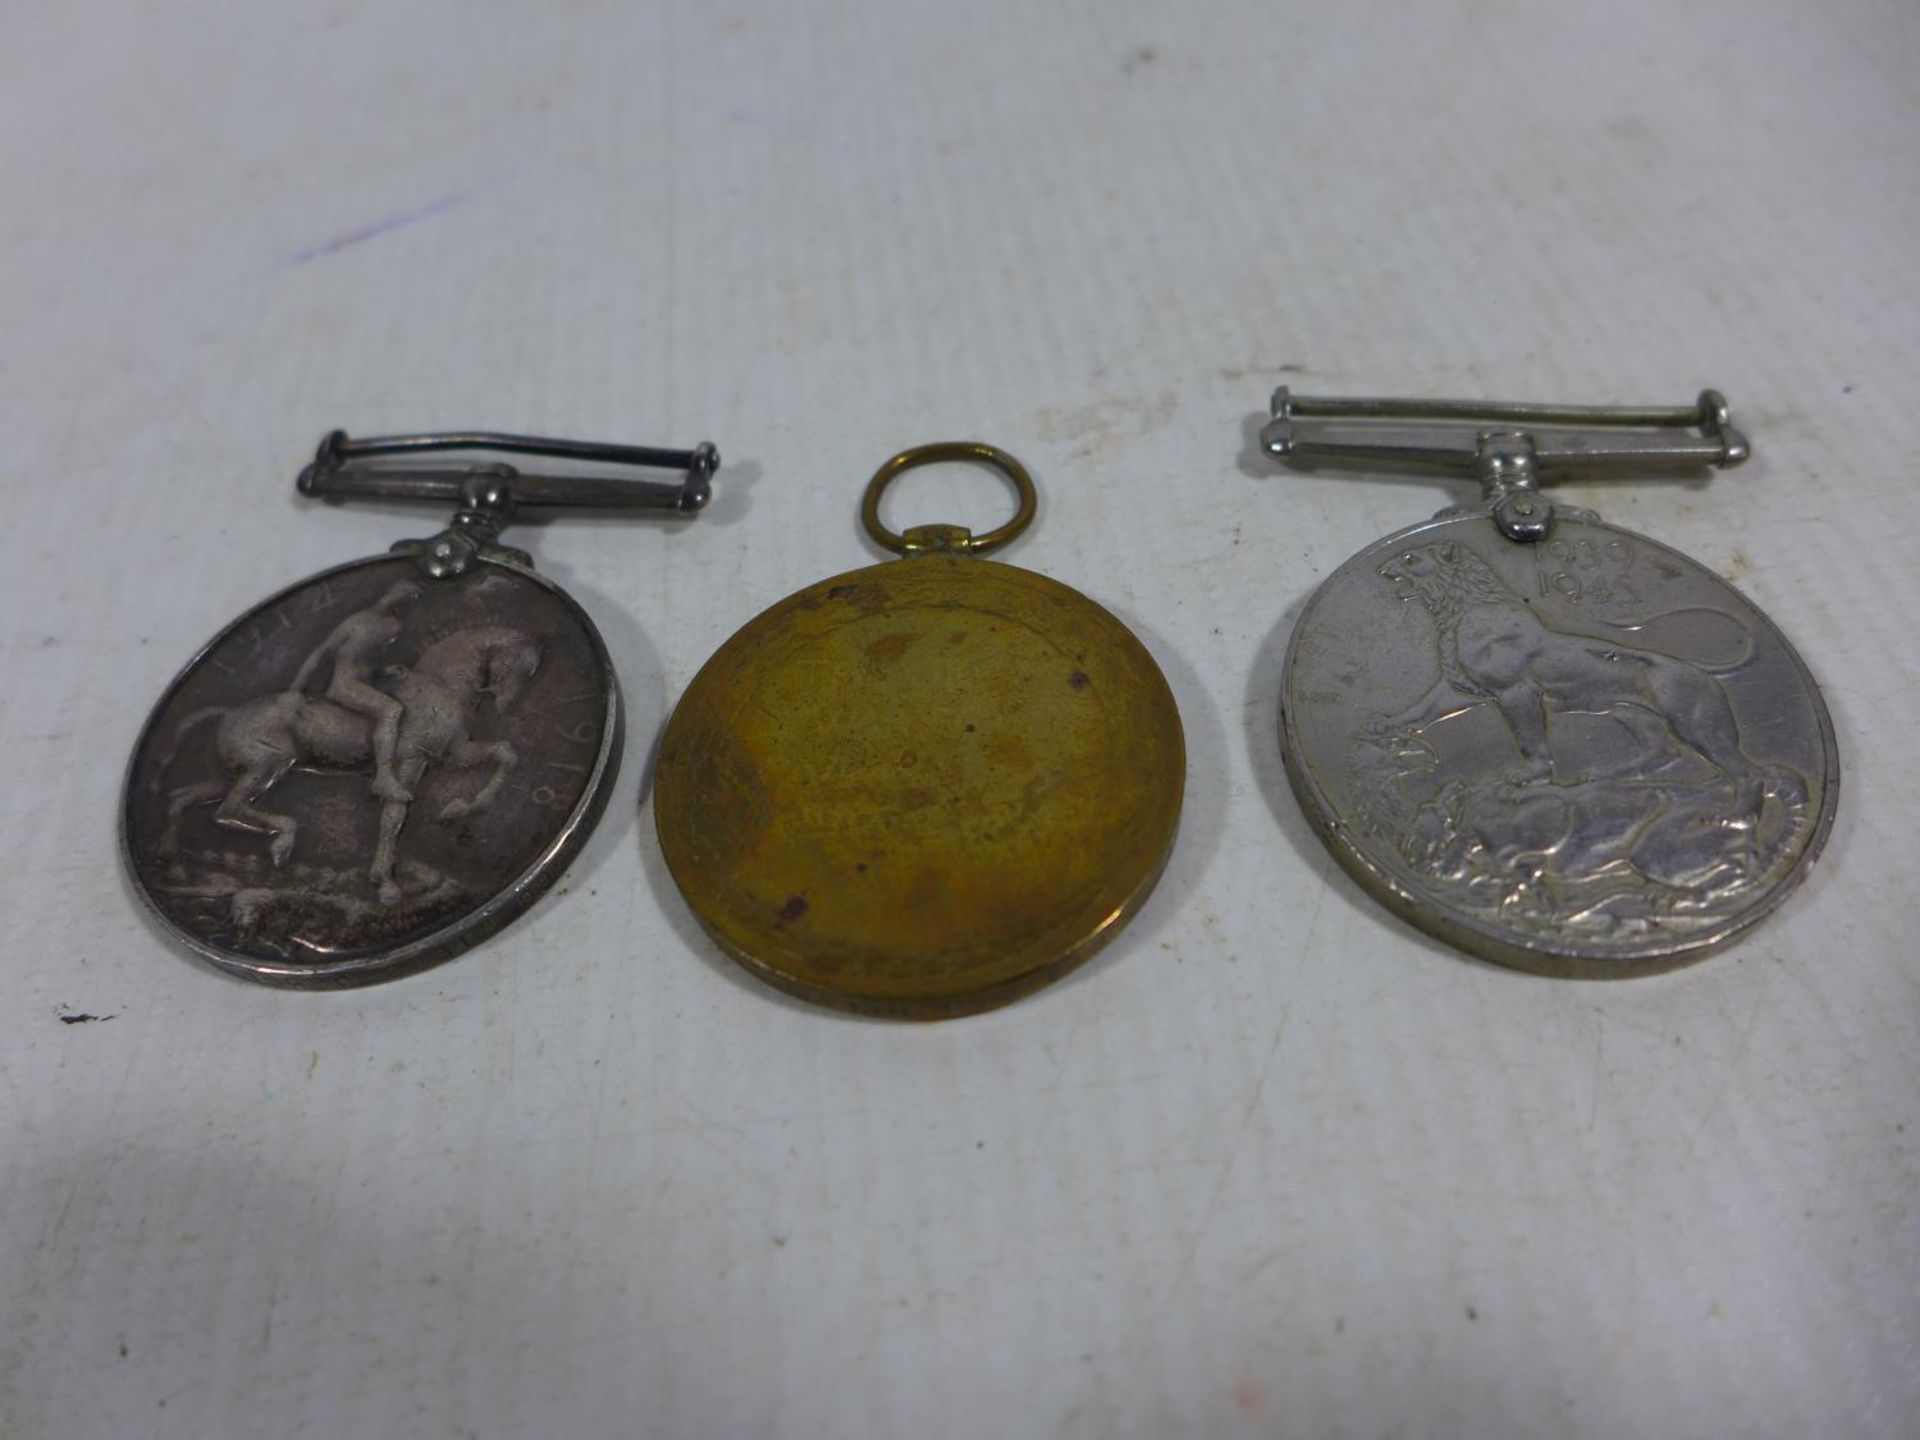 A WORLD WAR I MEDAL PAIR AWARDED TO 202360 PRIVATE C J HULME NORTH STAFFS REGIMENT AMD A WORLD WAR - Image 2 of 2